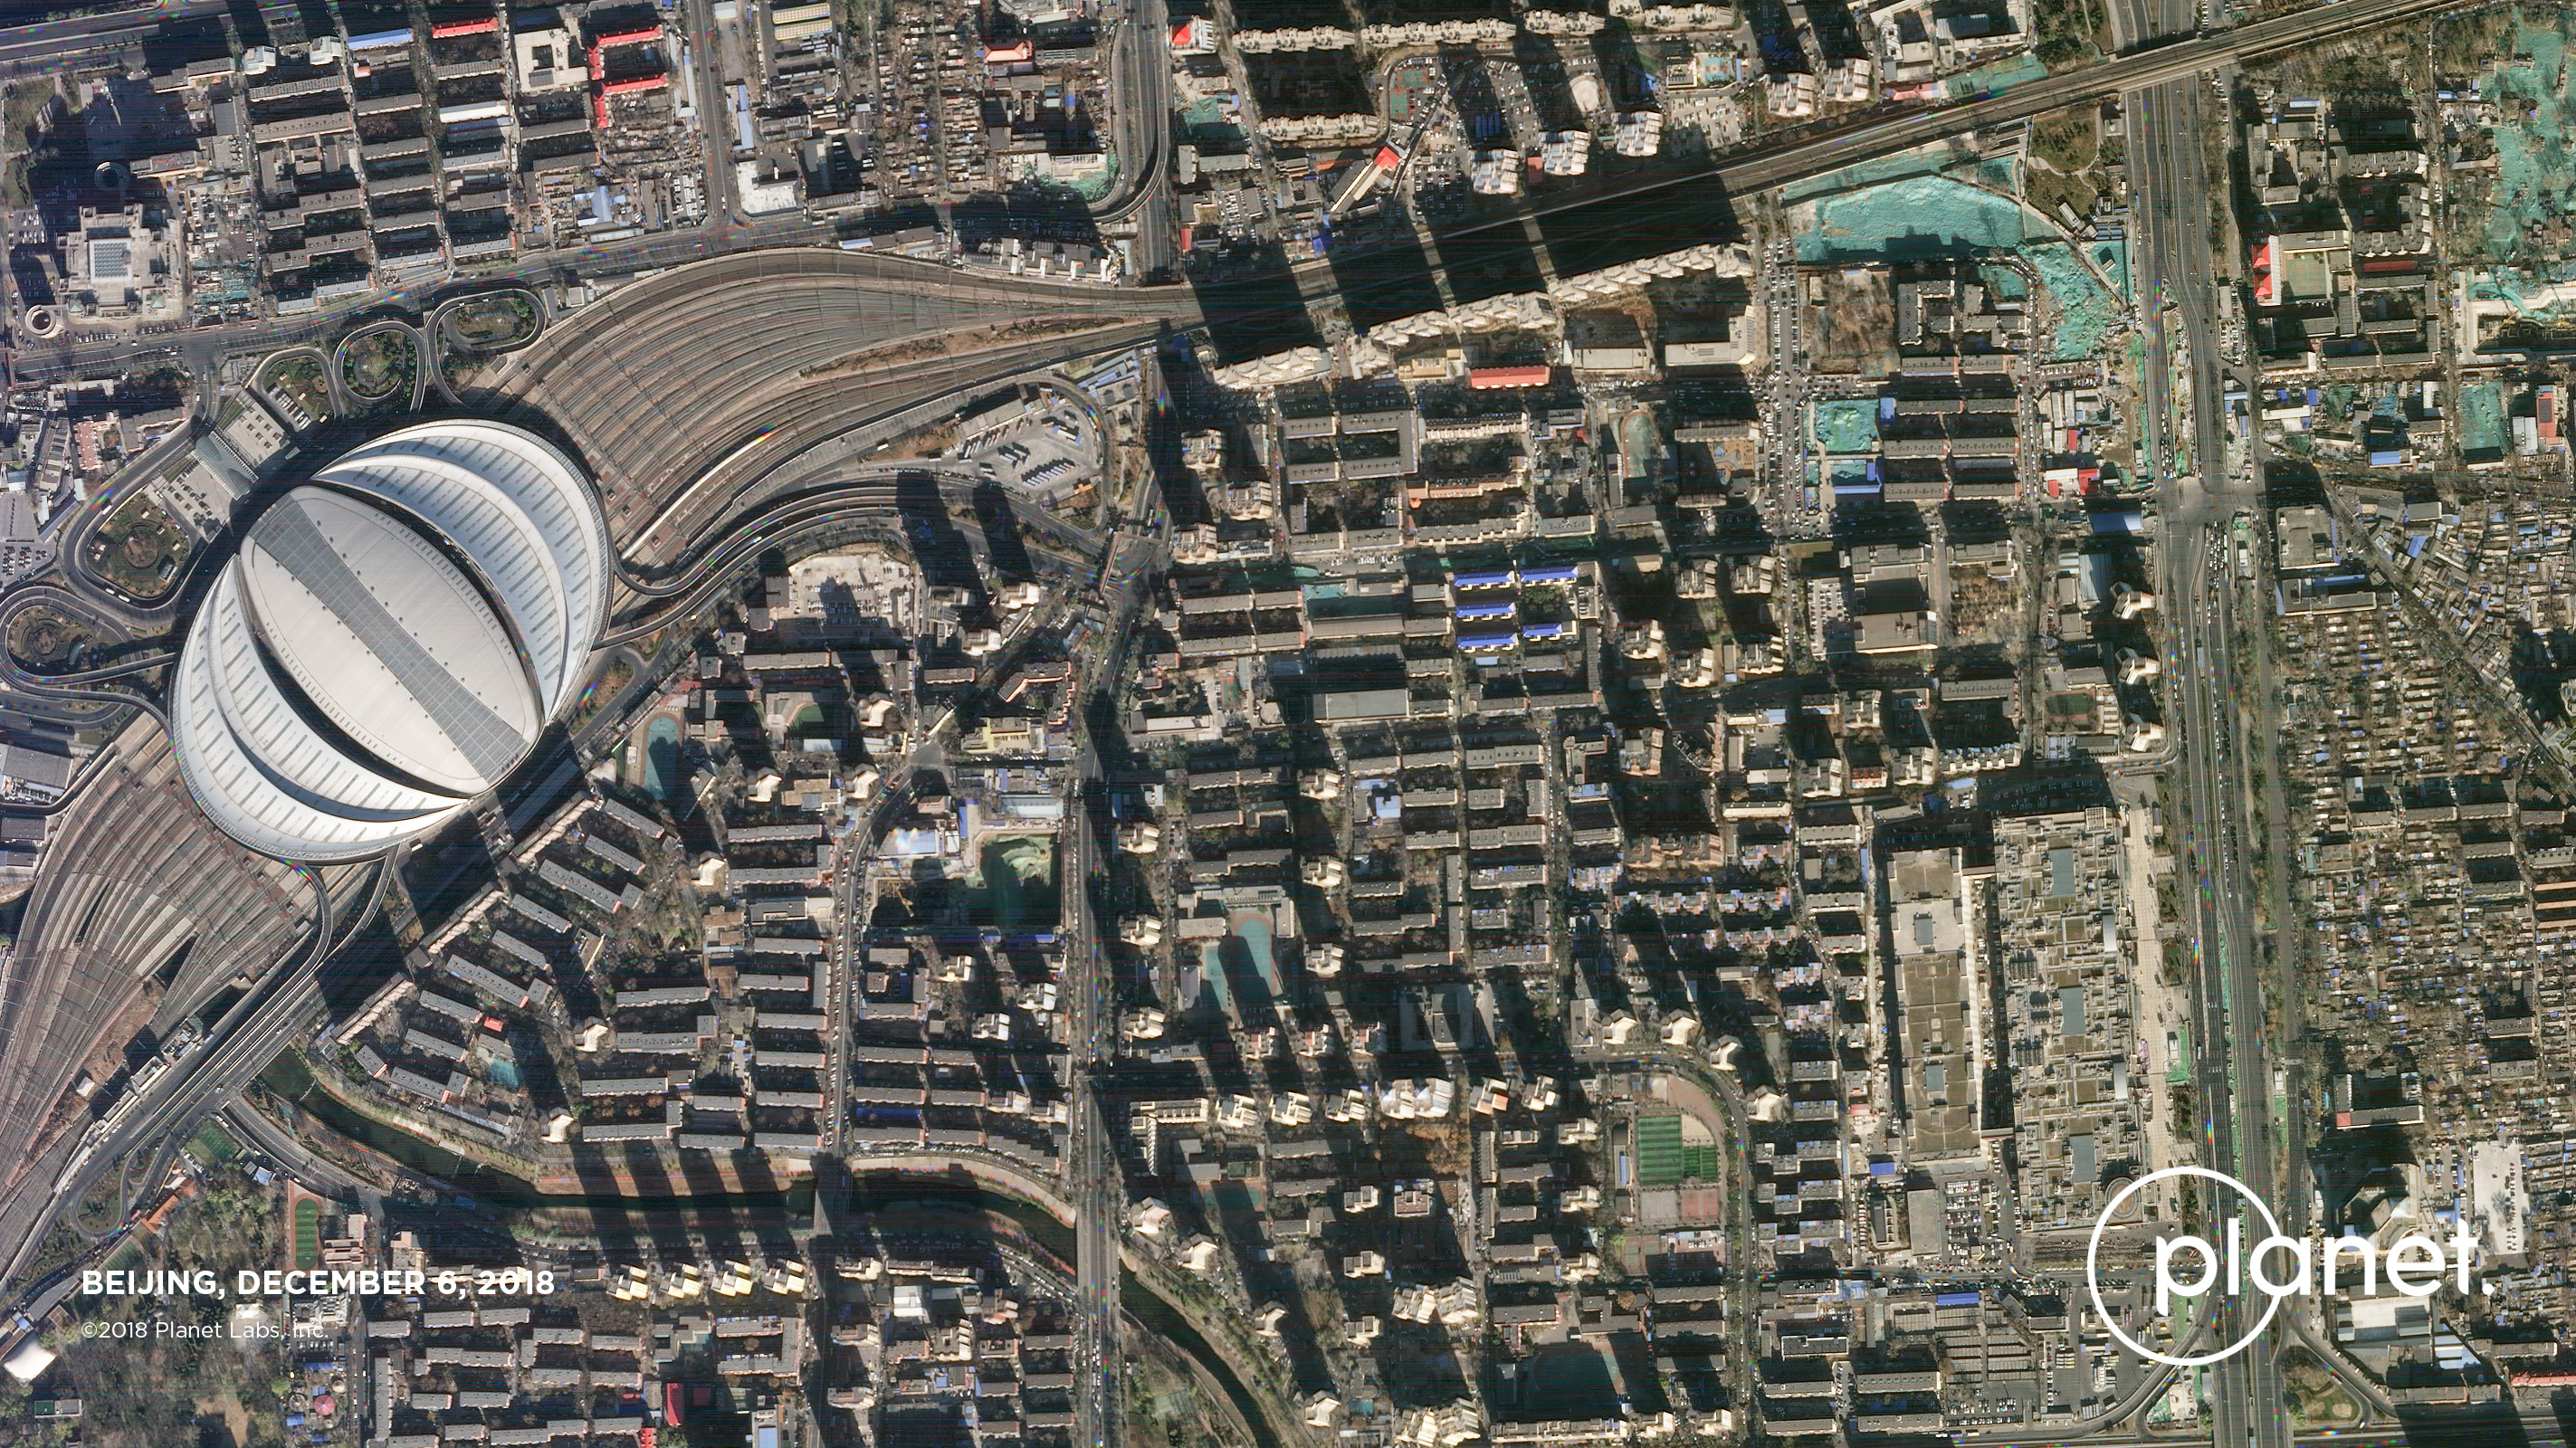 Imagery of Beijing, China captured by SSL-built SkySat